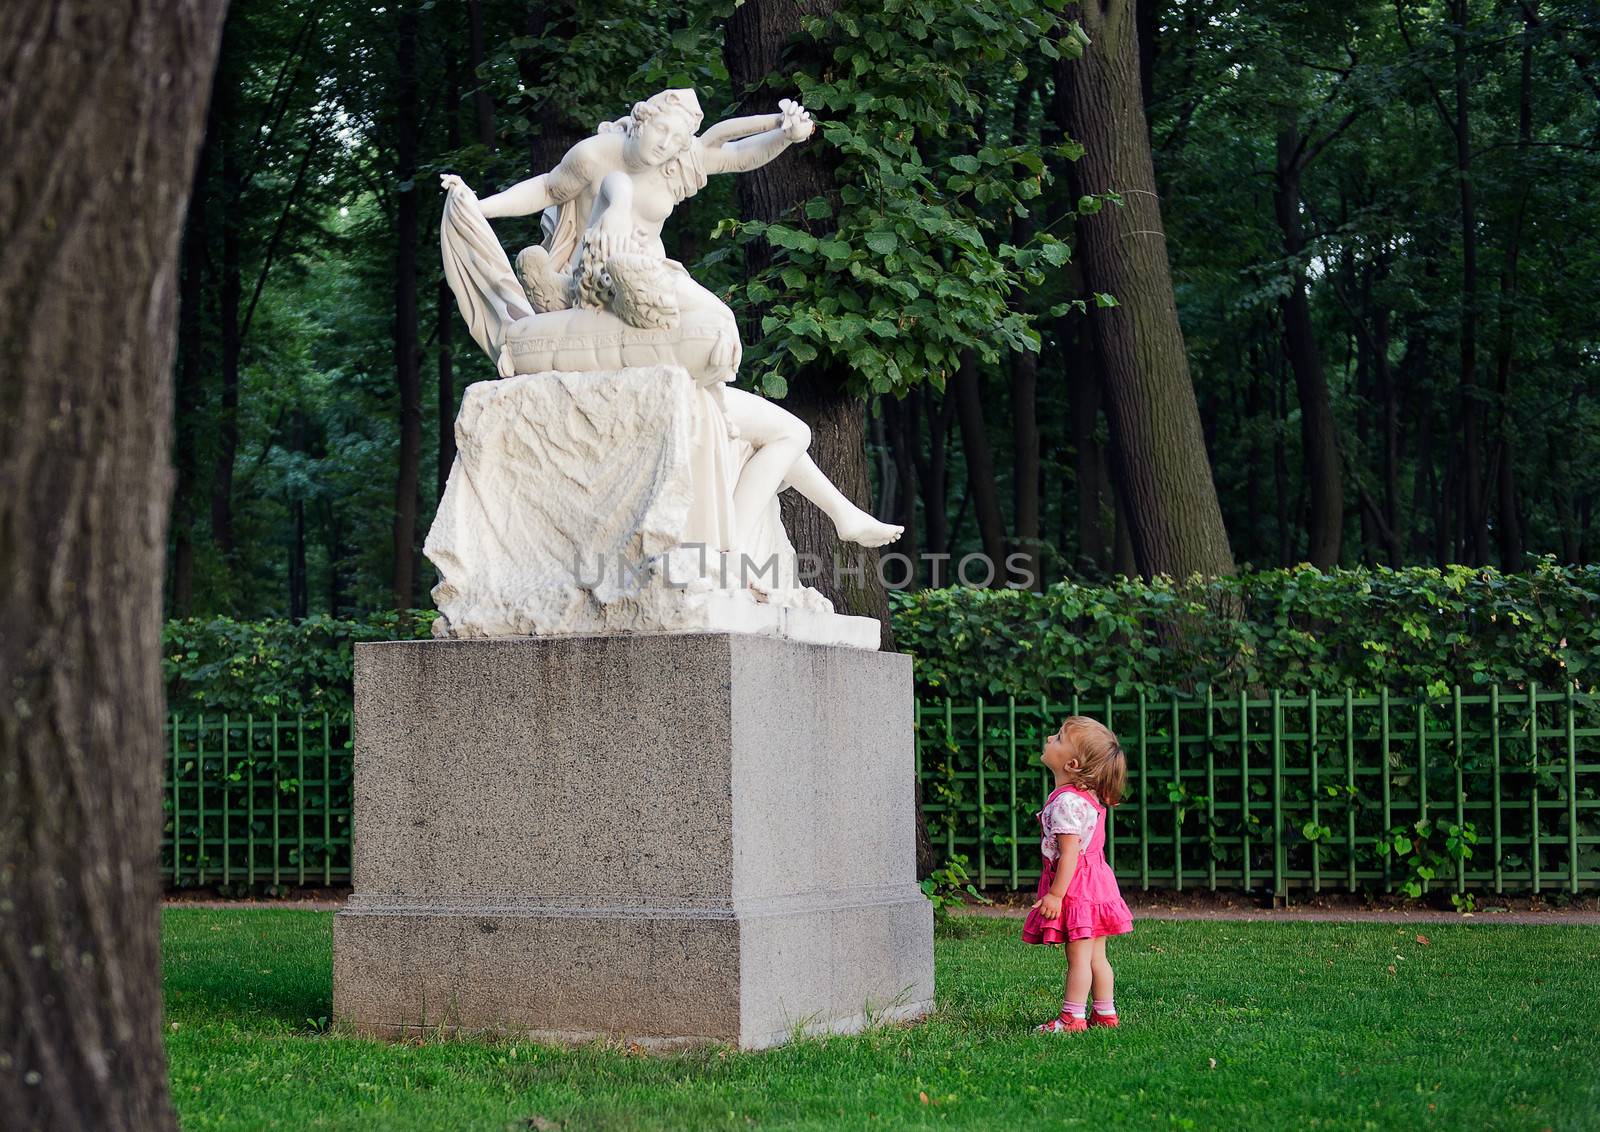 Little girl and  sculpture by SURZ